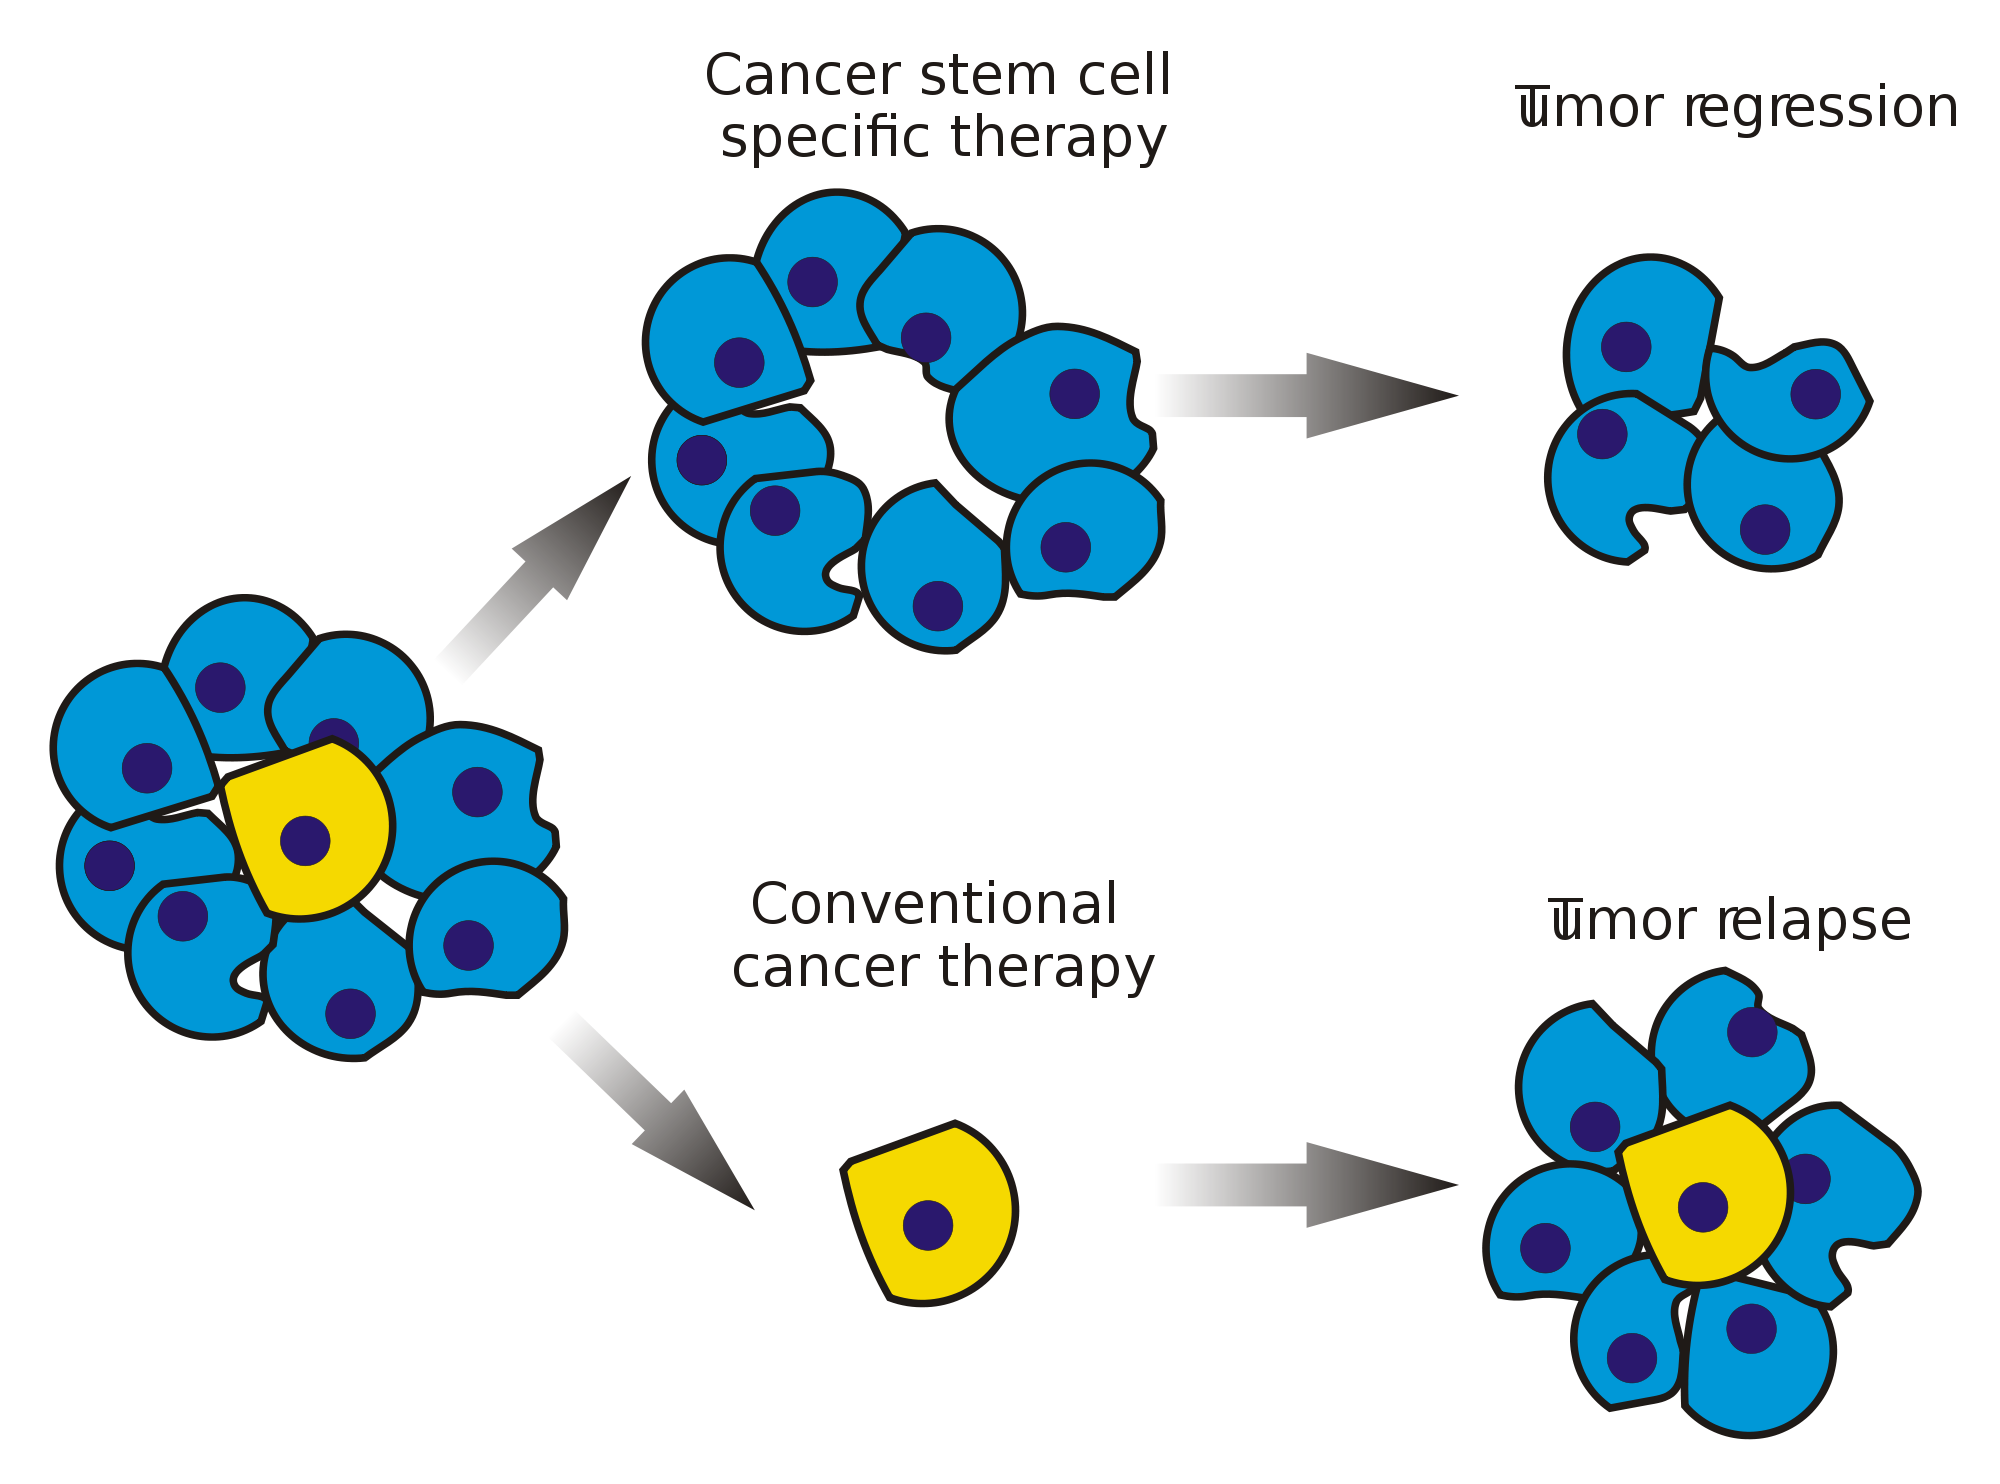 research article on cancer stem cell